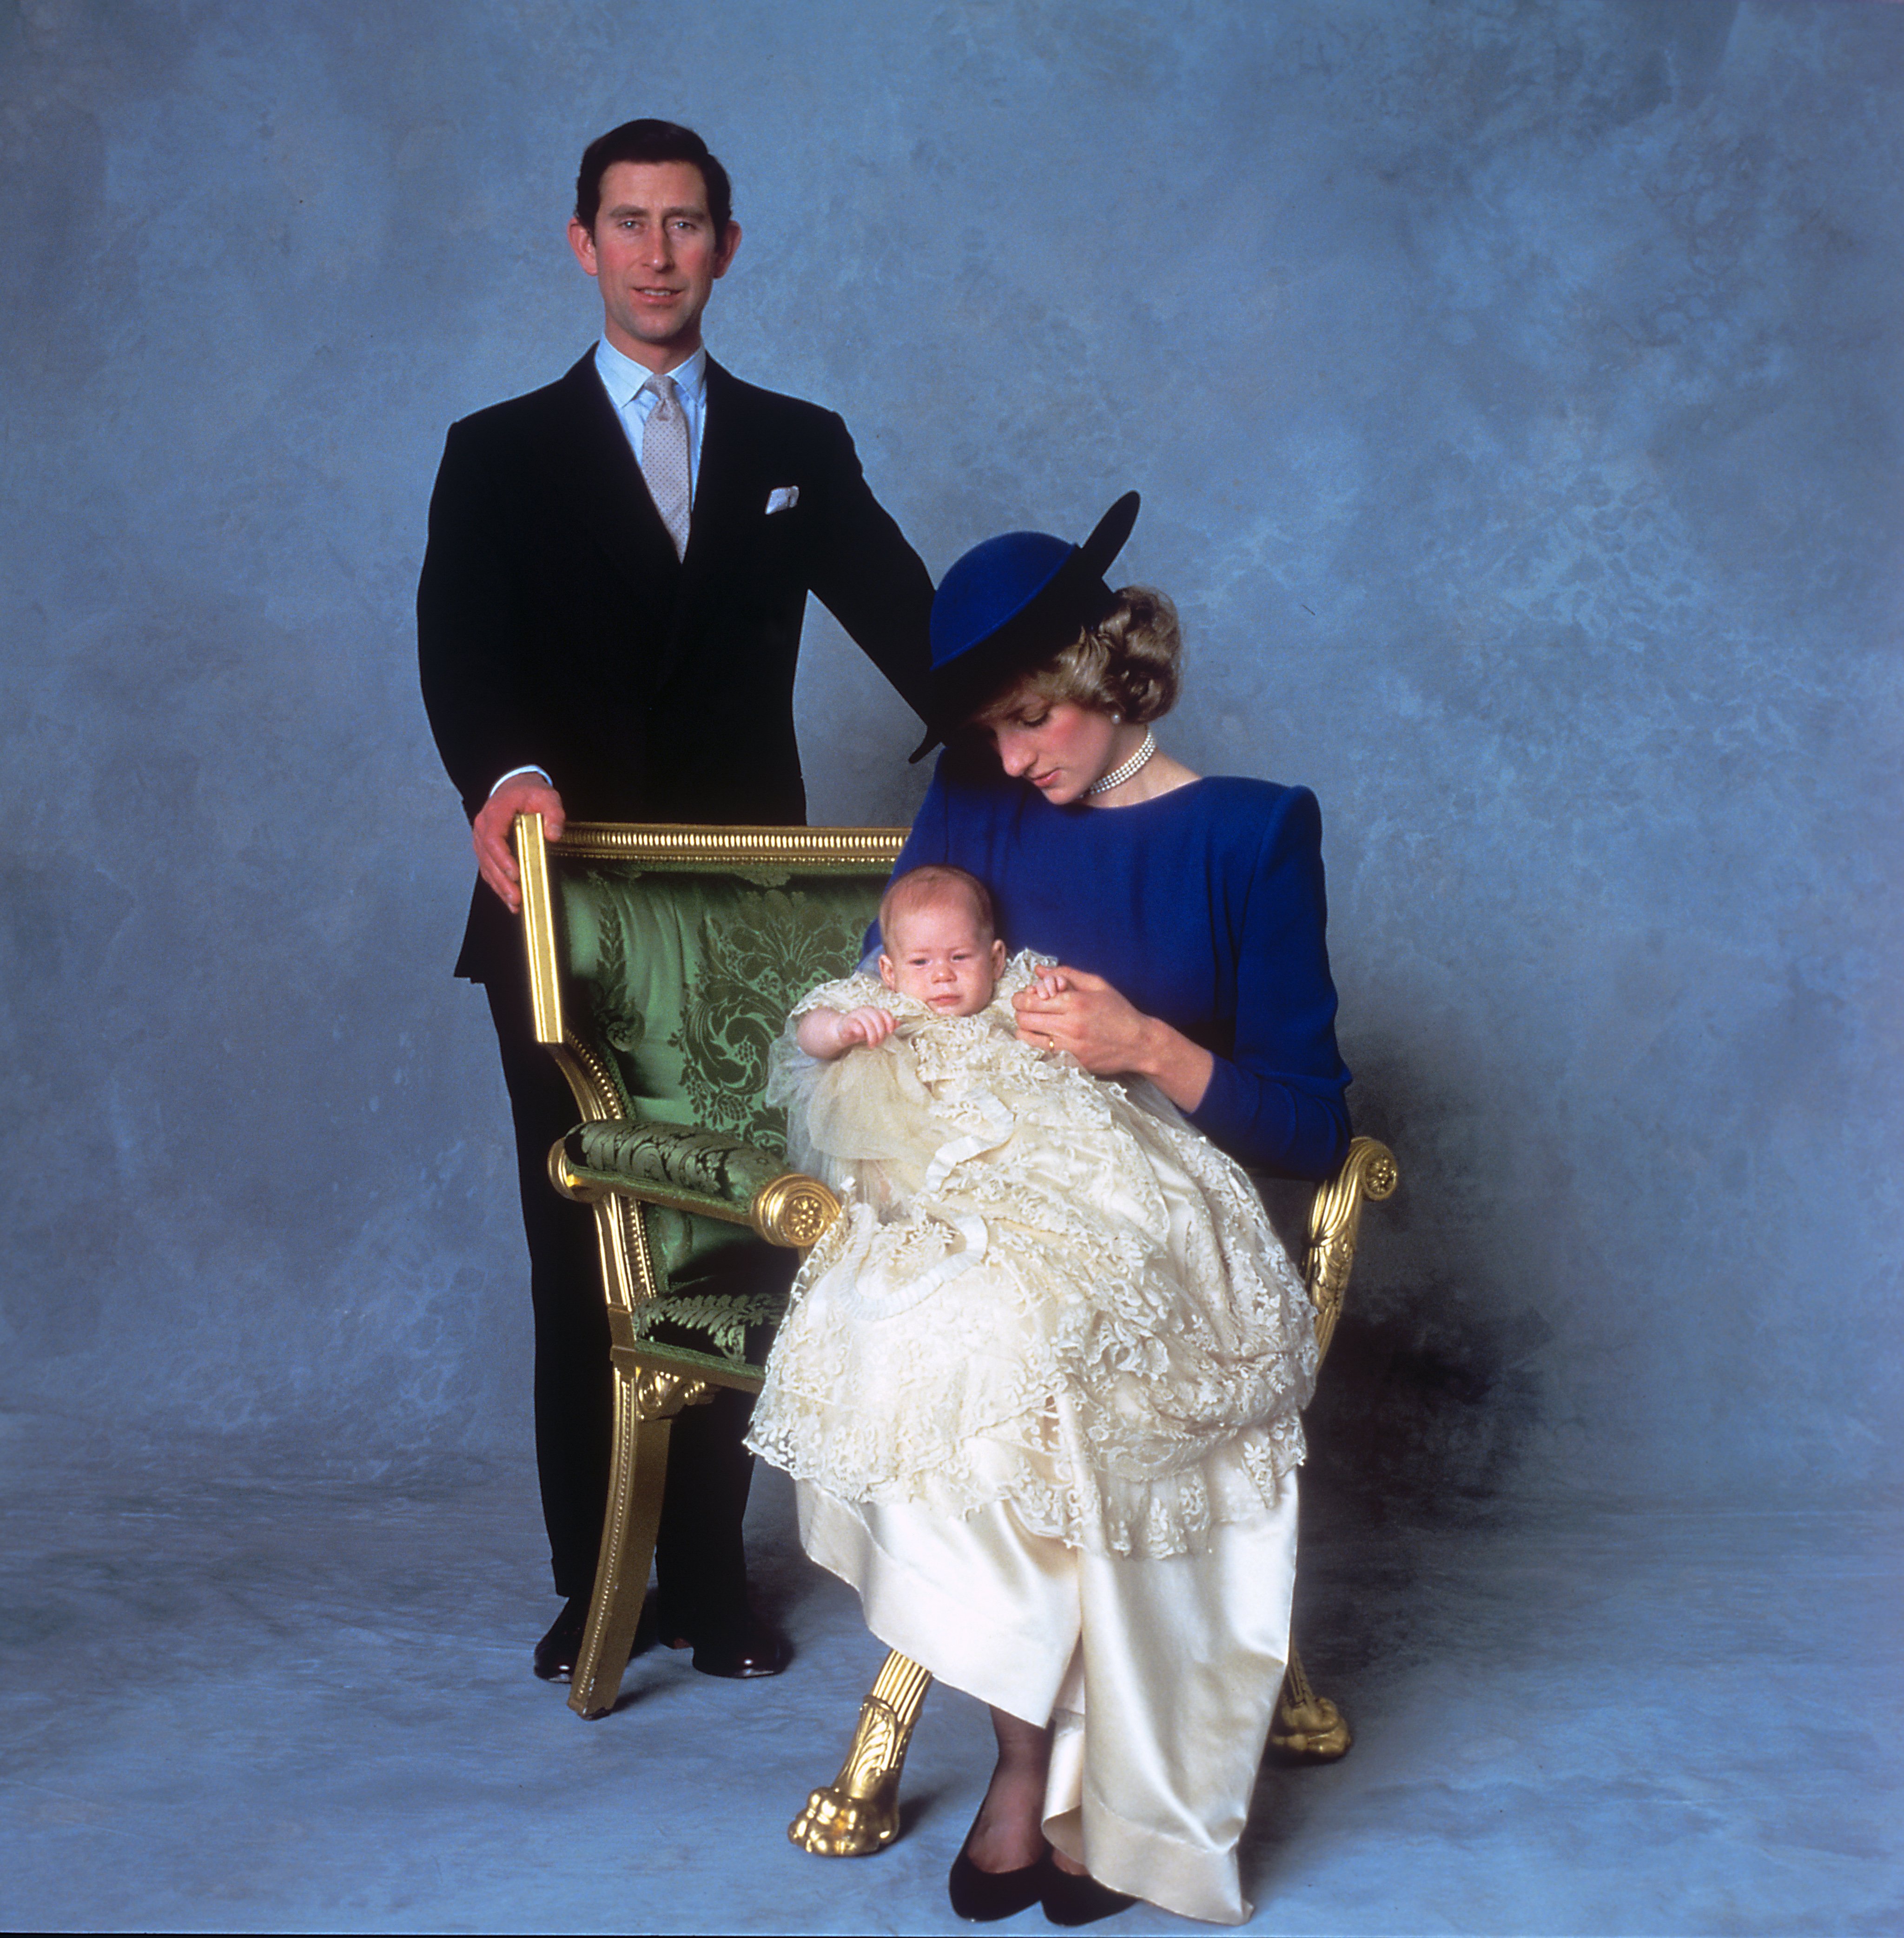 Prince Harry, Prince Andrew and Princess Diana pose for a portrait at Prince Harry's christening in Windsor, England.  December 21, 1984 |  Source: Getty Images 